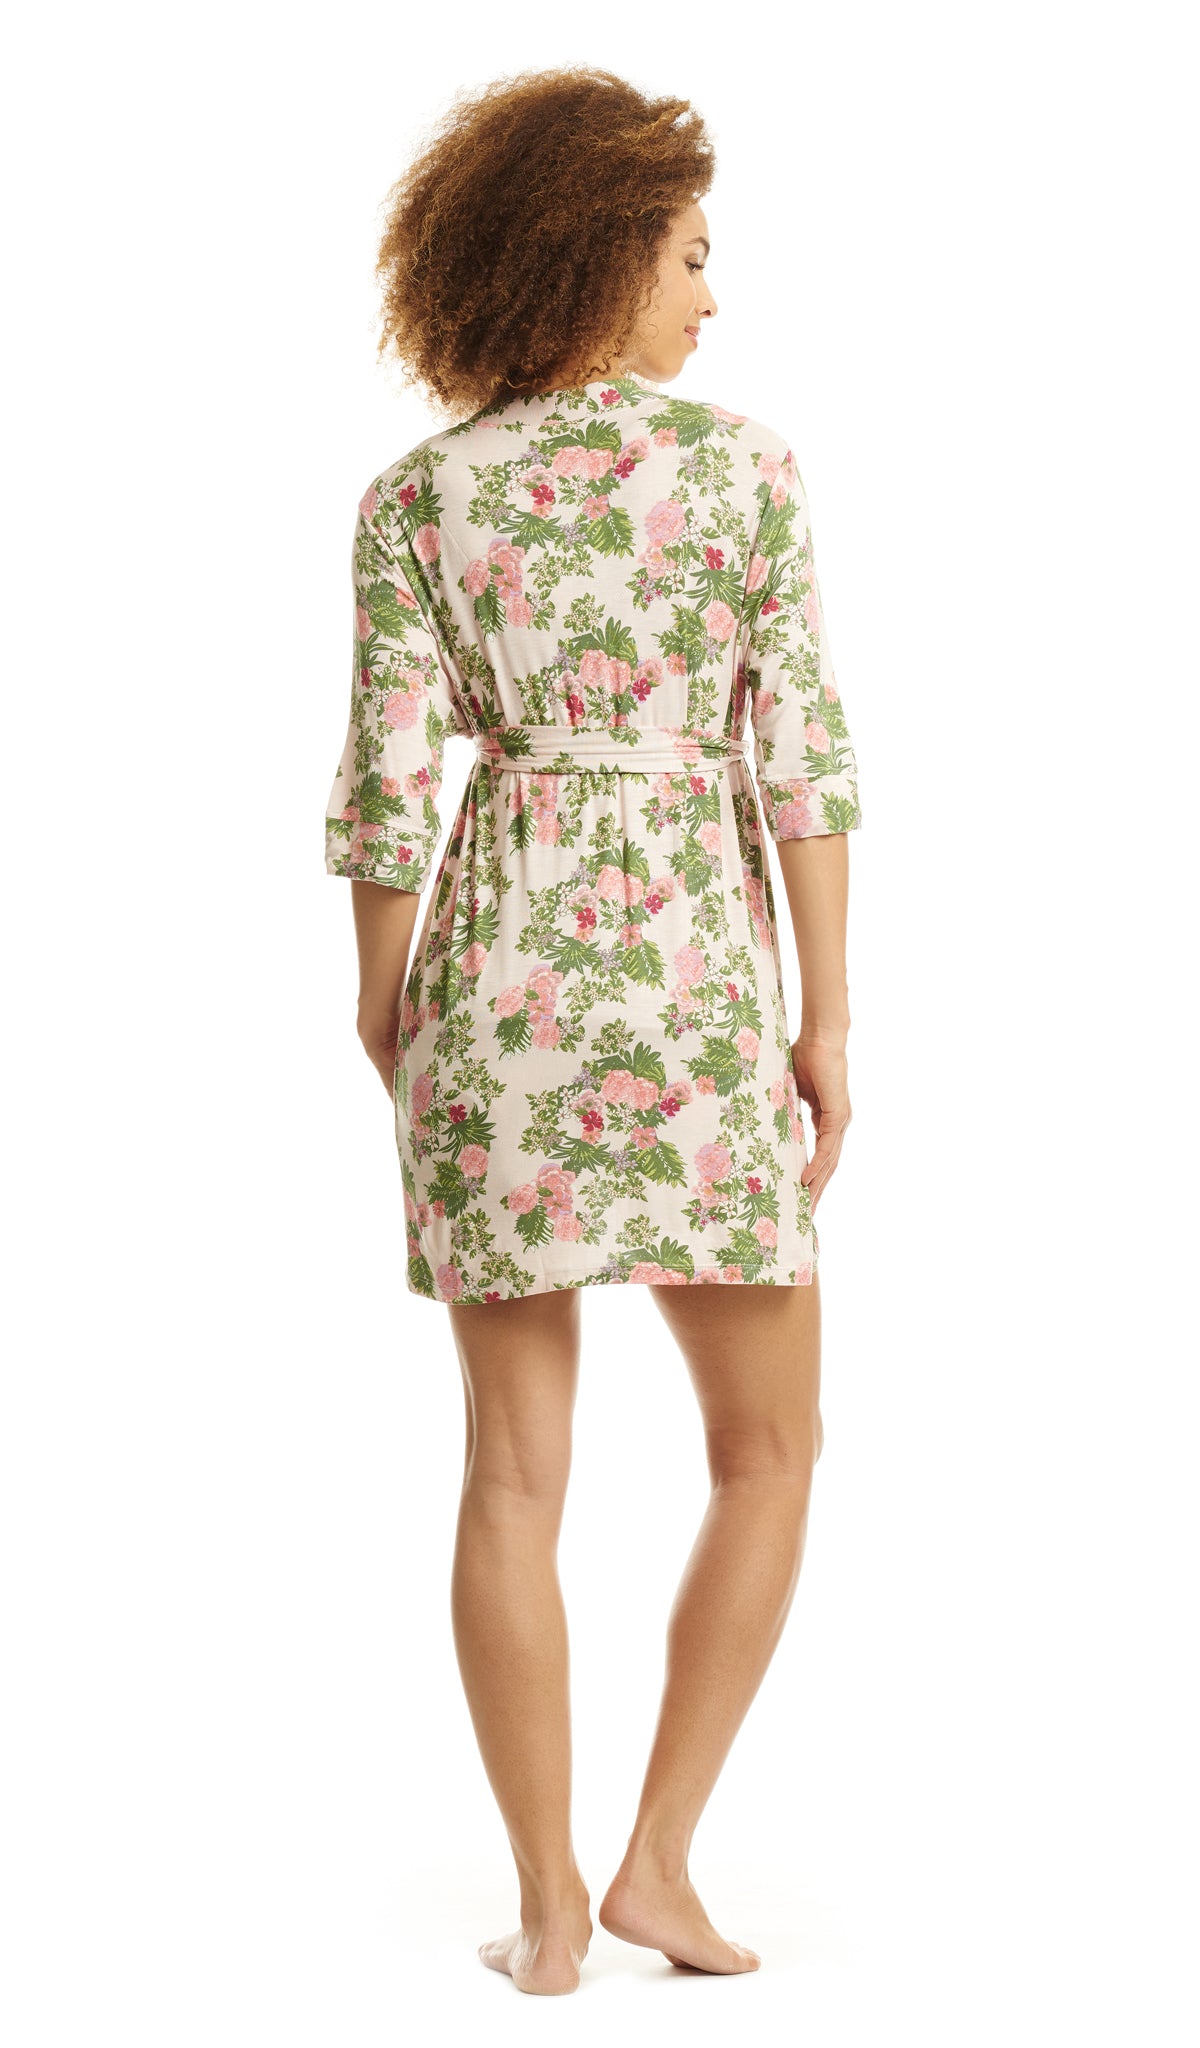 Beige Floral Adalia 5-Piece Set, back shot of woman wearing robe and short.